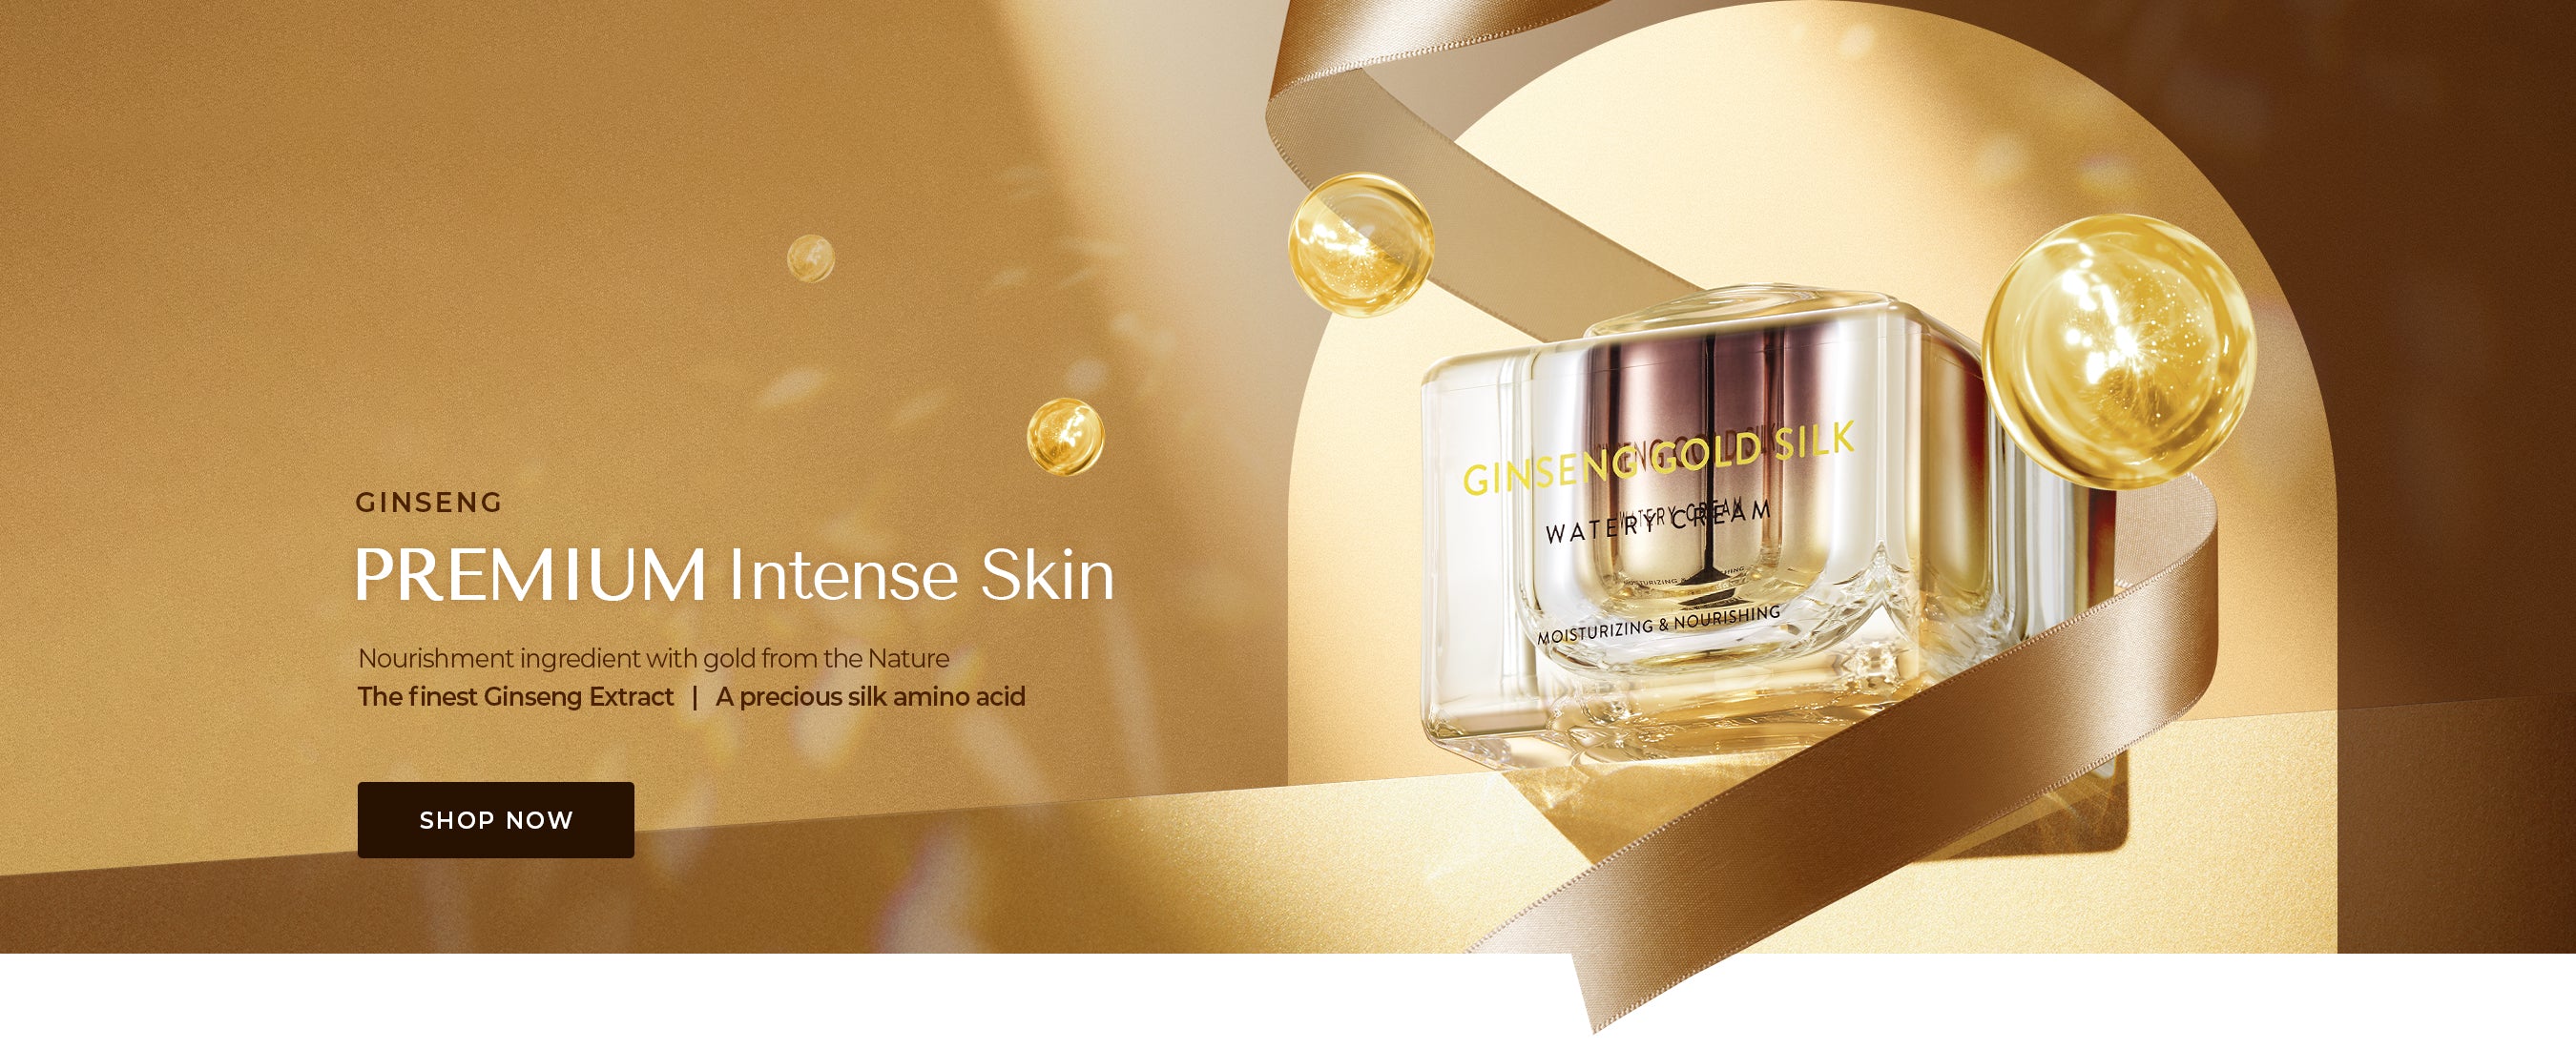 Premium Intense Skin Nourishment ingredient with gold from the Nature